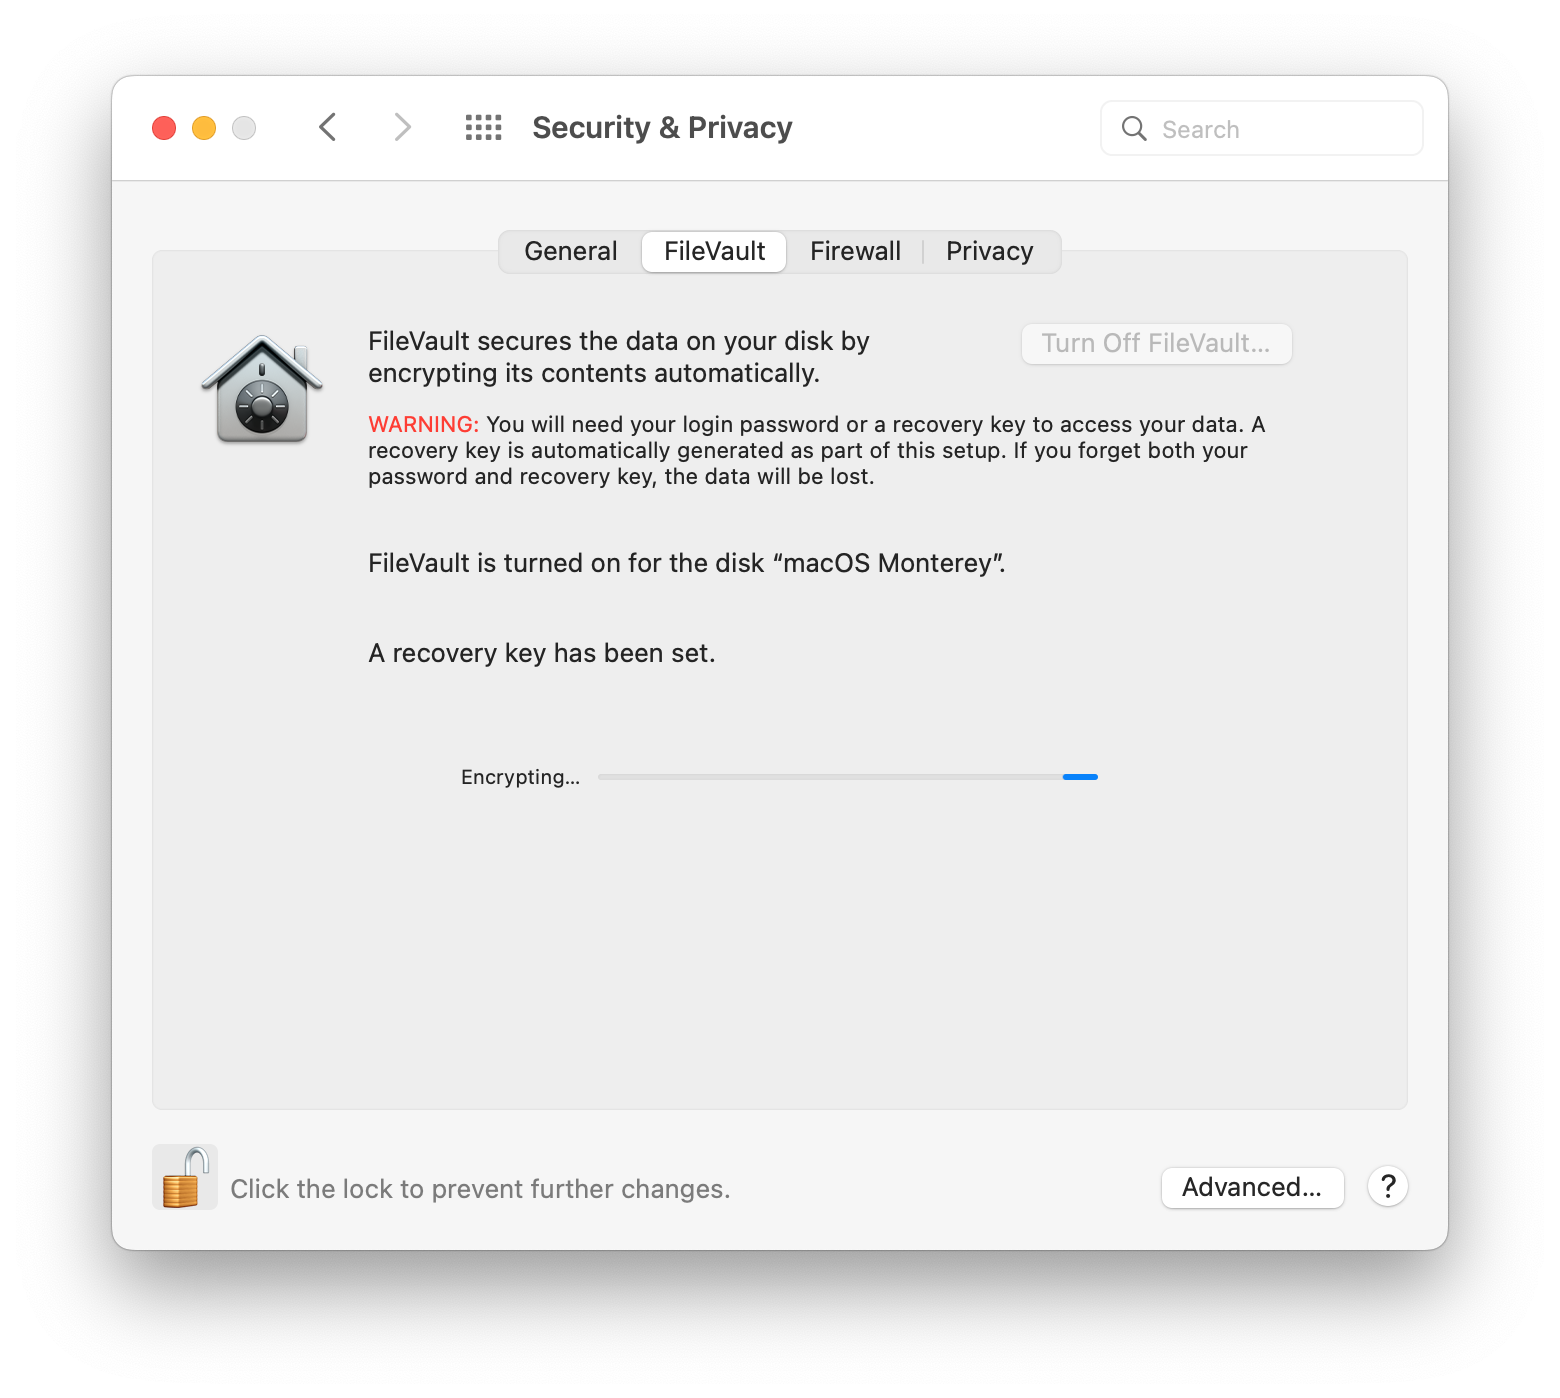 FileVault is turned on for the disk 